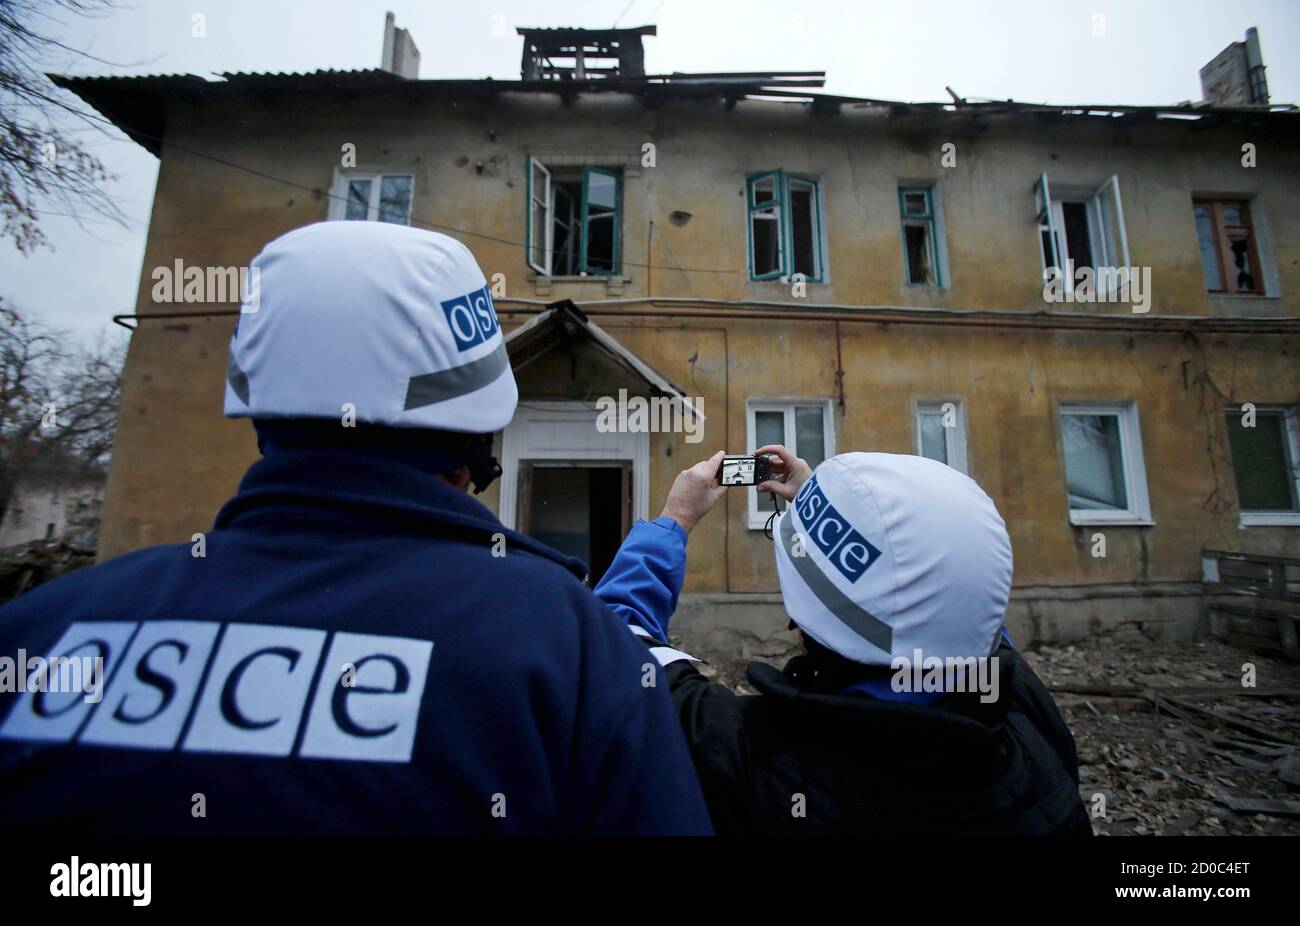 An Organization for Security and Cooperation in Europe (OSCE) investigator takes pictures of a building after it was damaged by recent shelling in the western part of Donetsk, eastern Ukraine, November 27, 2014. REUTERS/Antonio Bronic (UKRAINE  - Tags: CONFLICT CIVIL UNREST) Stock Photo